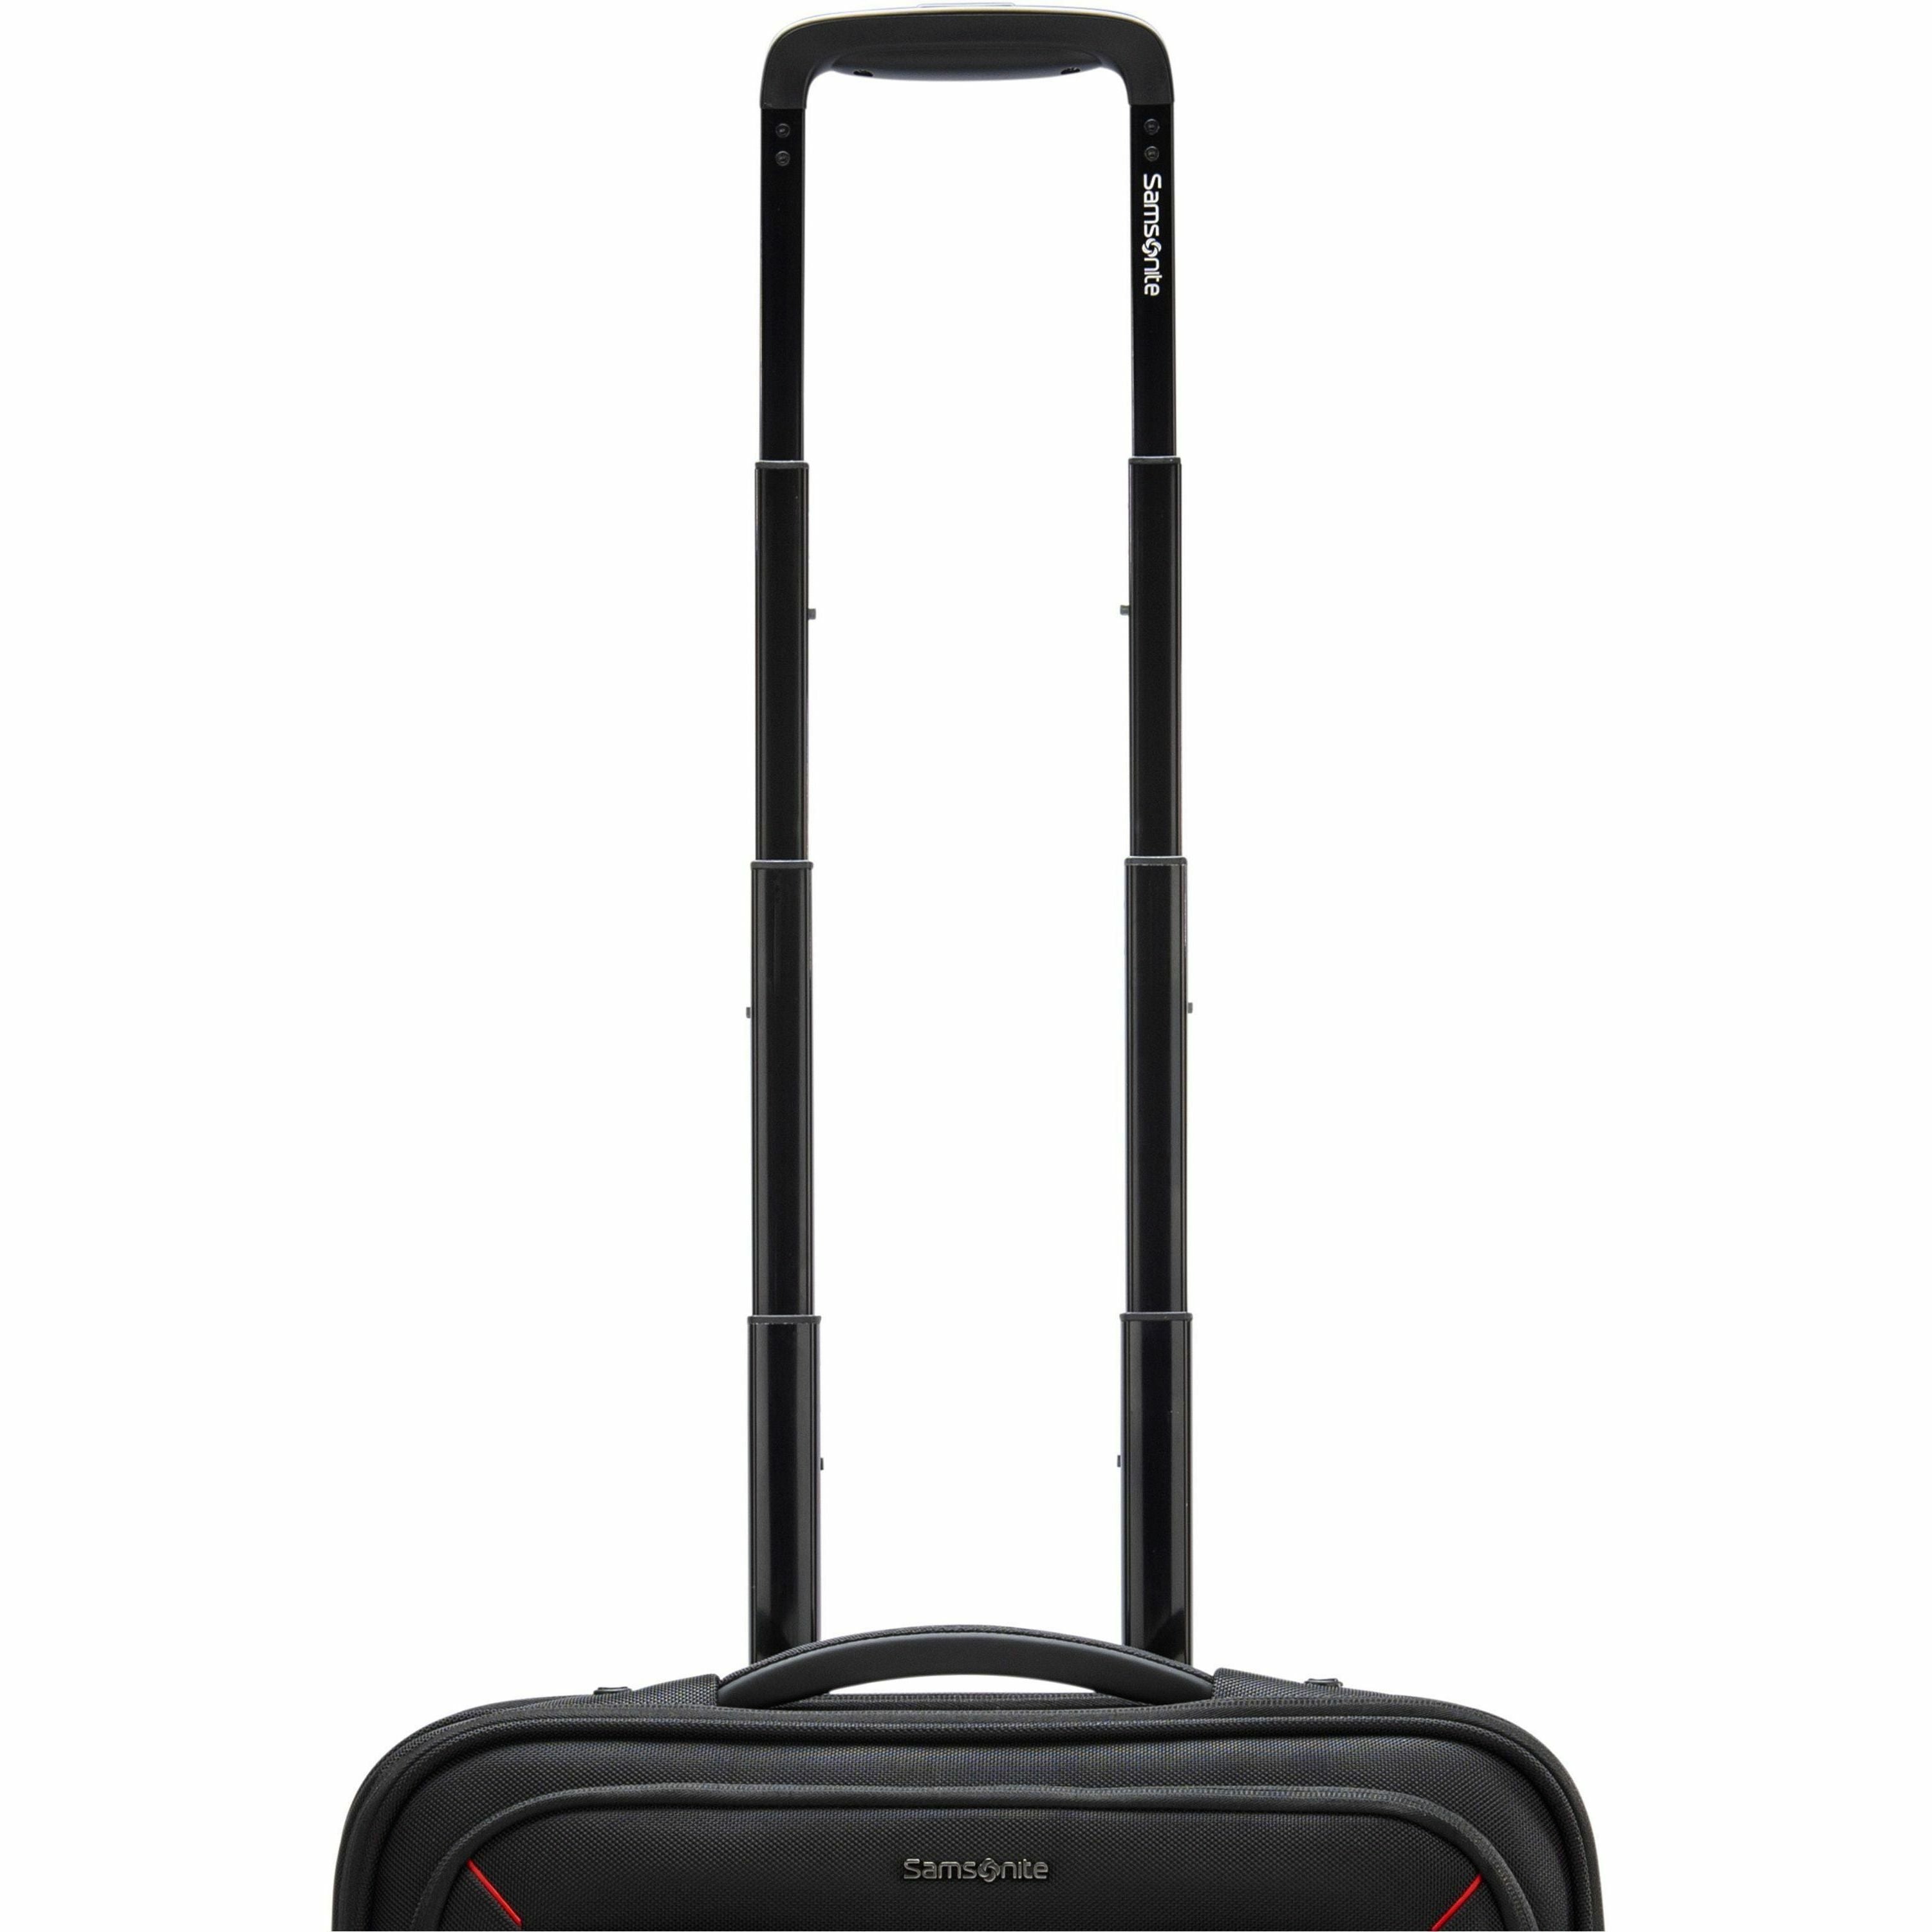 samsonite-xenon-30-travel-luggage-case-for-129-to-156-notebook-tablet-accessories-black-1680d-ballistic-polyester-body-tricot-interior-material-trolley-strap-handle-1-each_sml1473331041 - 6